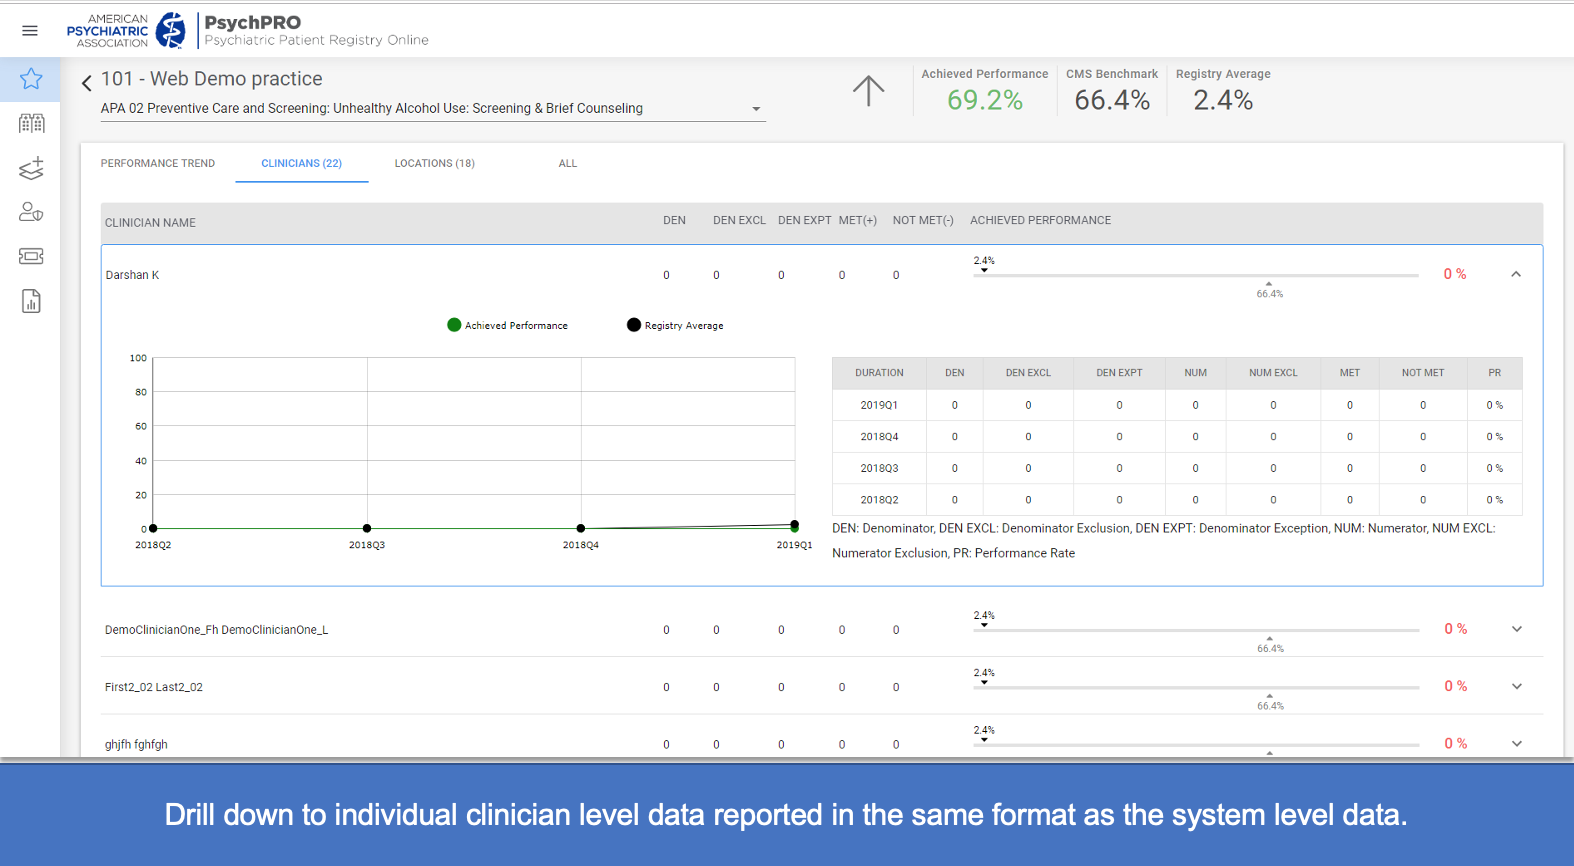 Screenshot of the view of the Dashboard in the PsychPRO Portal with the text Drill down to individual clinical level data reported in the same format as the system level data.